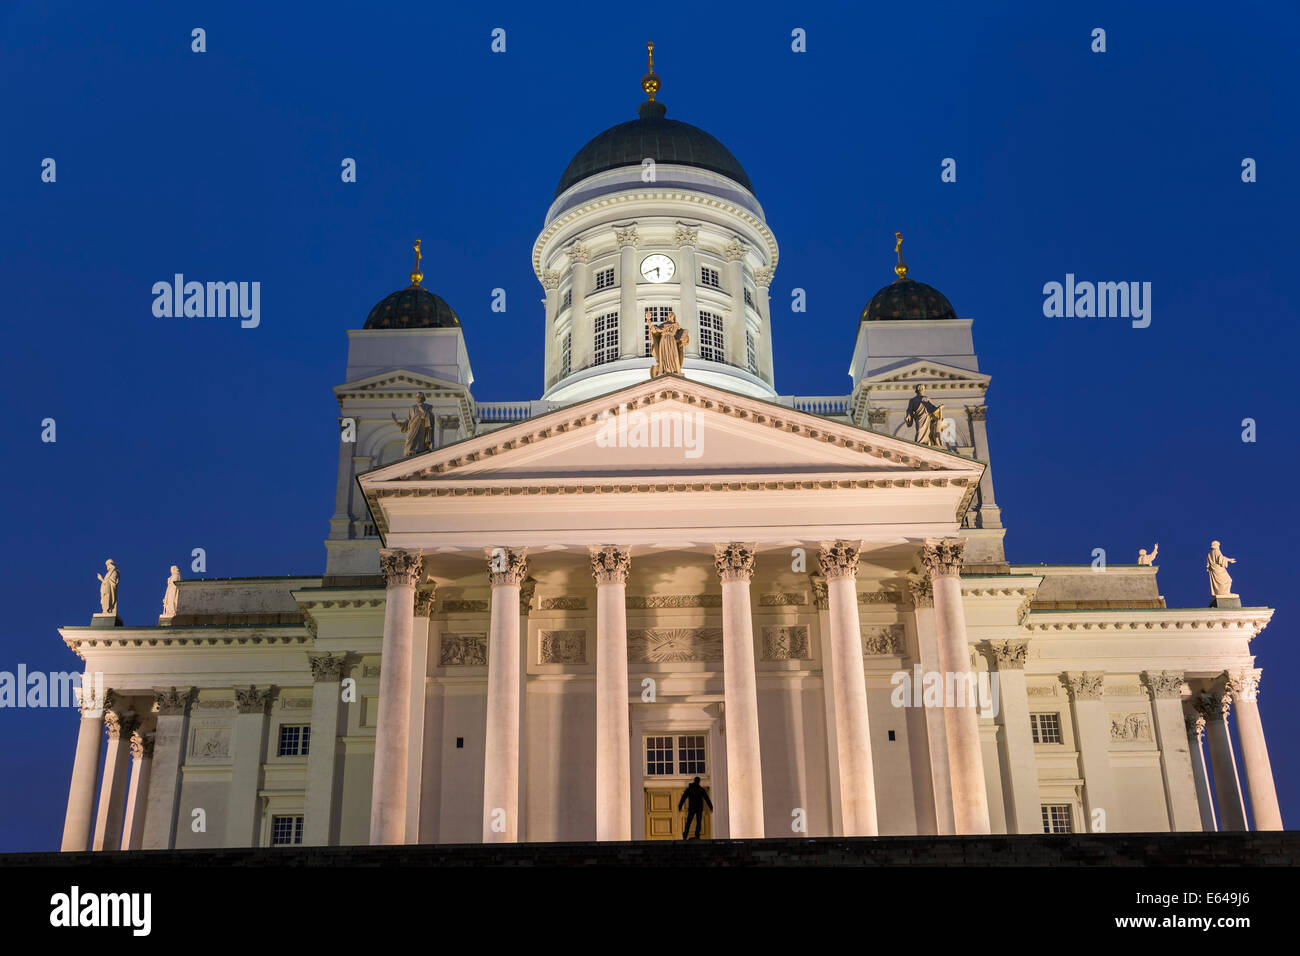 Lutheran cathedral, at dusk, Helsinki, Finland Stock Photo